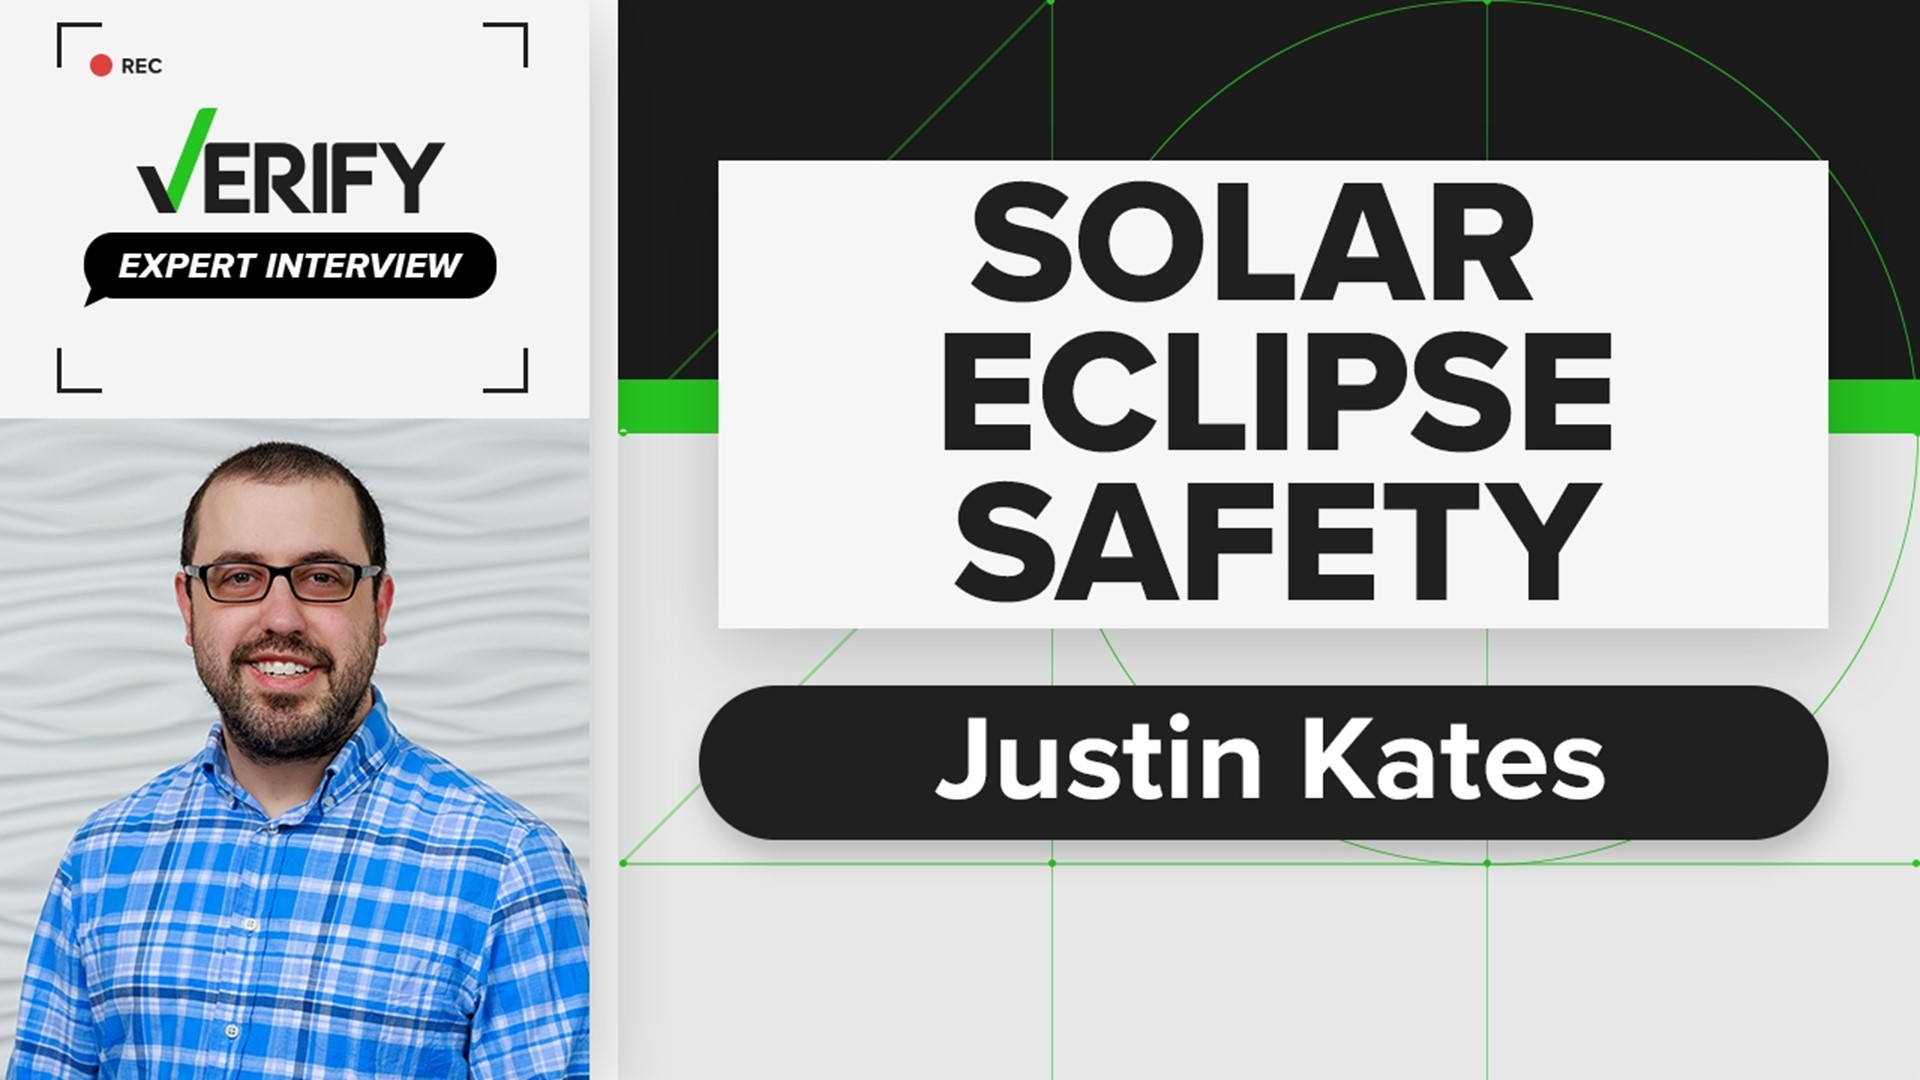 Justin Kates of the International Association of Emergency Managers’ U.S. Council. He explains why states have emergency preparations ahead of the solar eclipse.